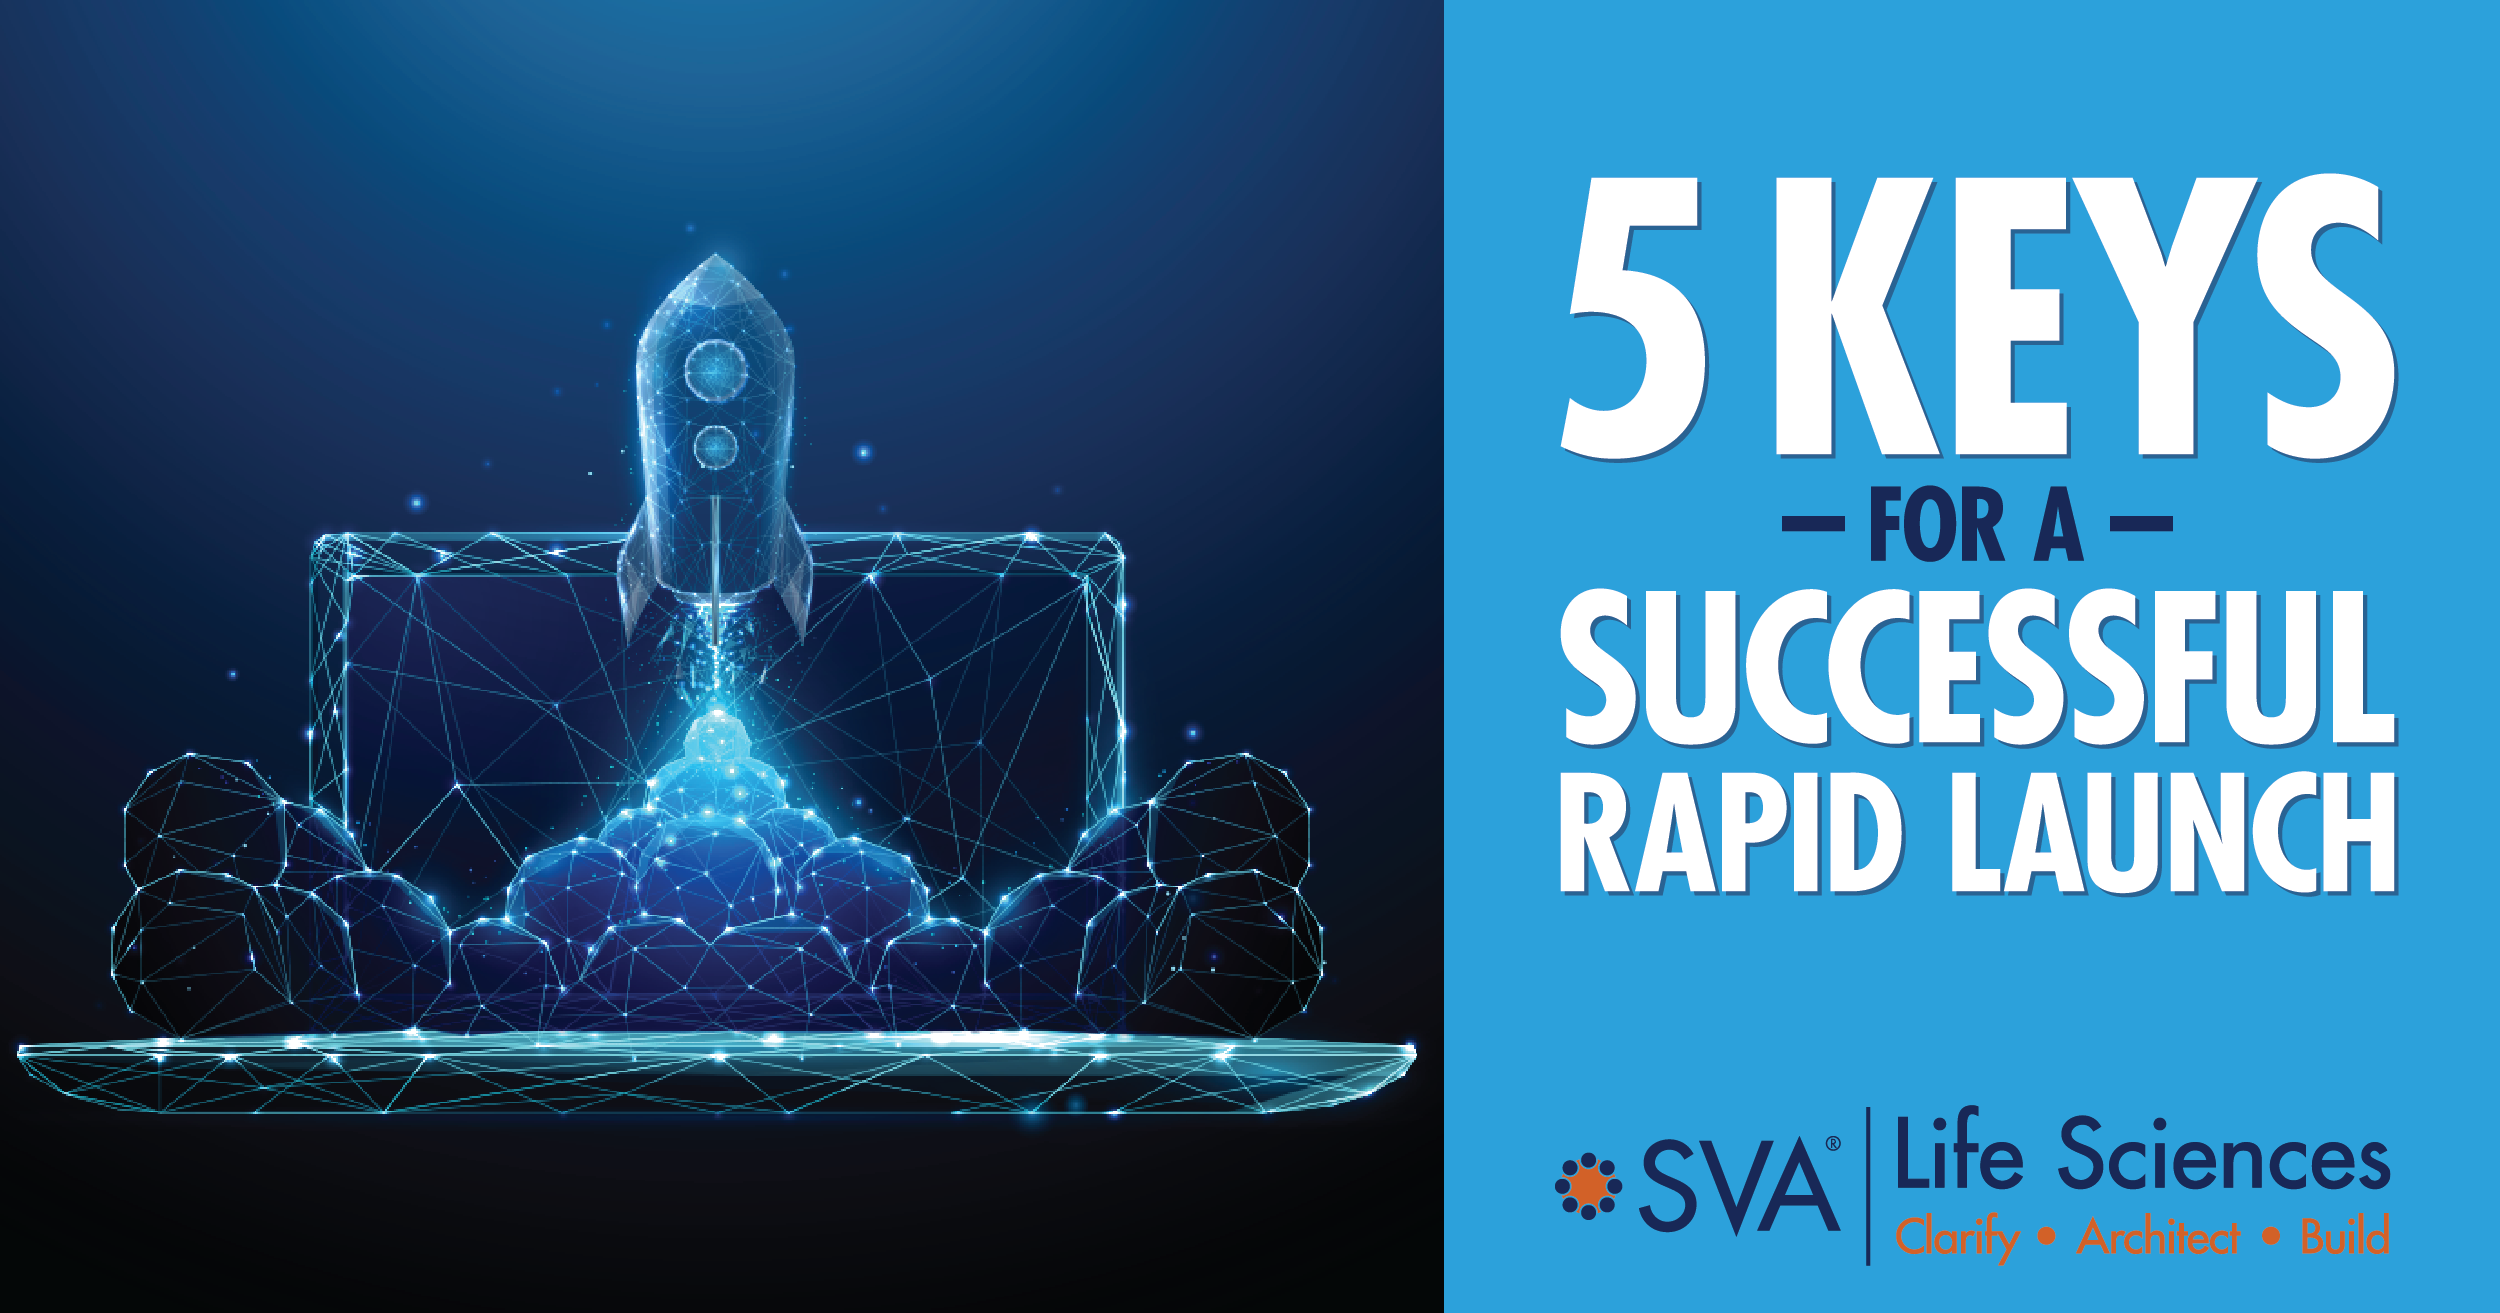 Five Keys for a Successful Rapid Launch